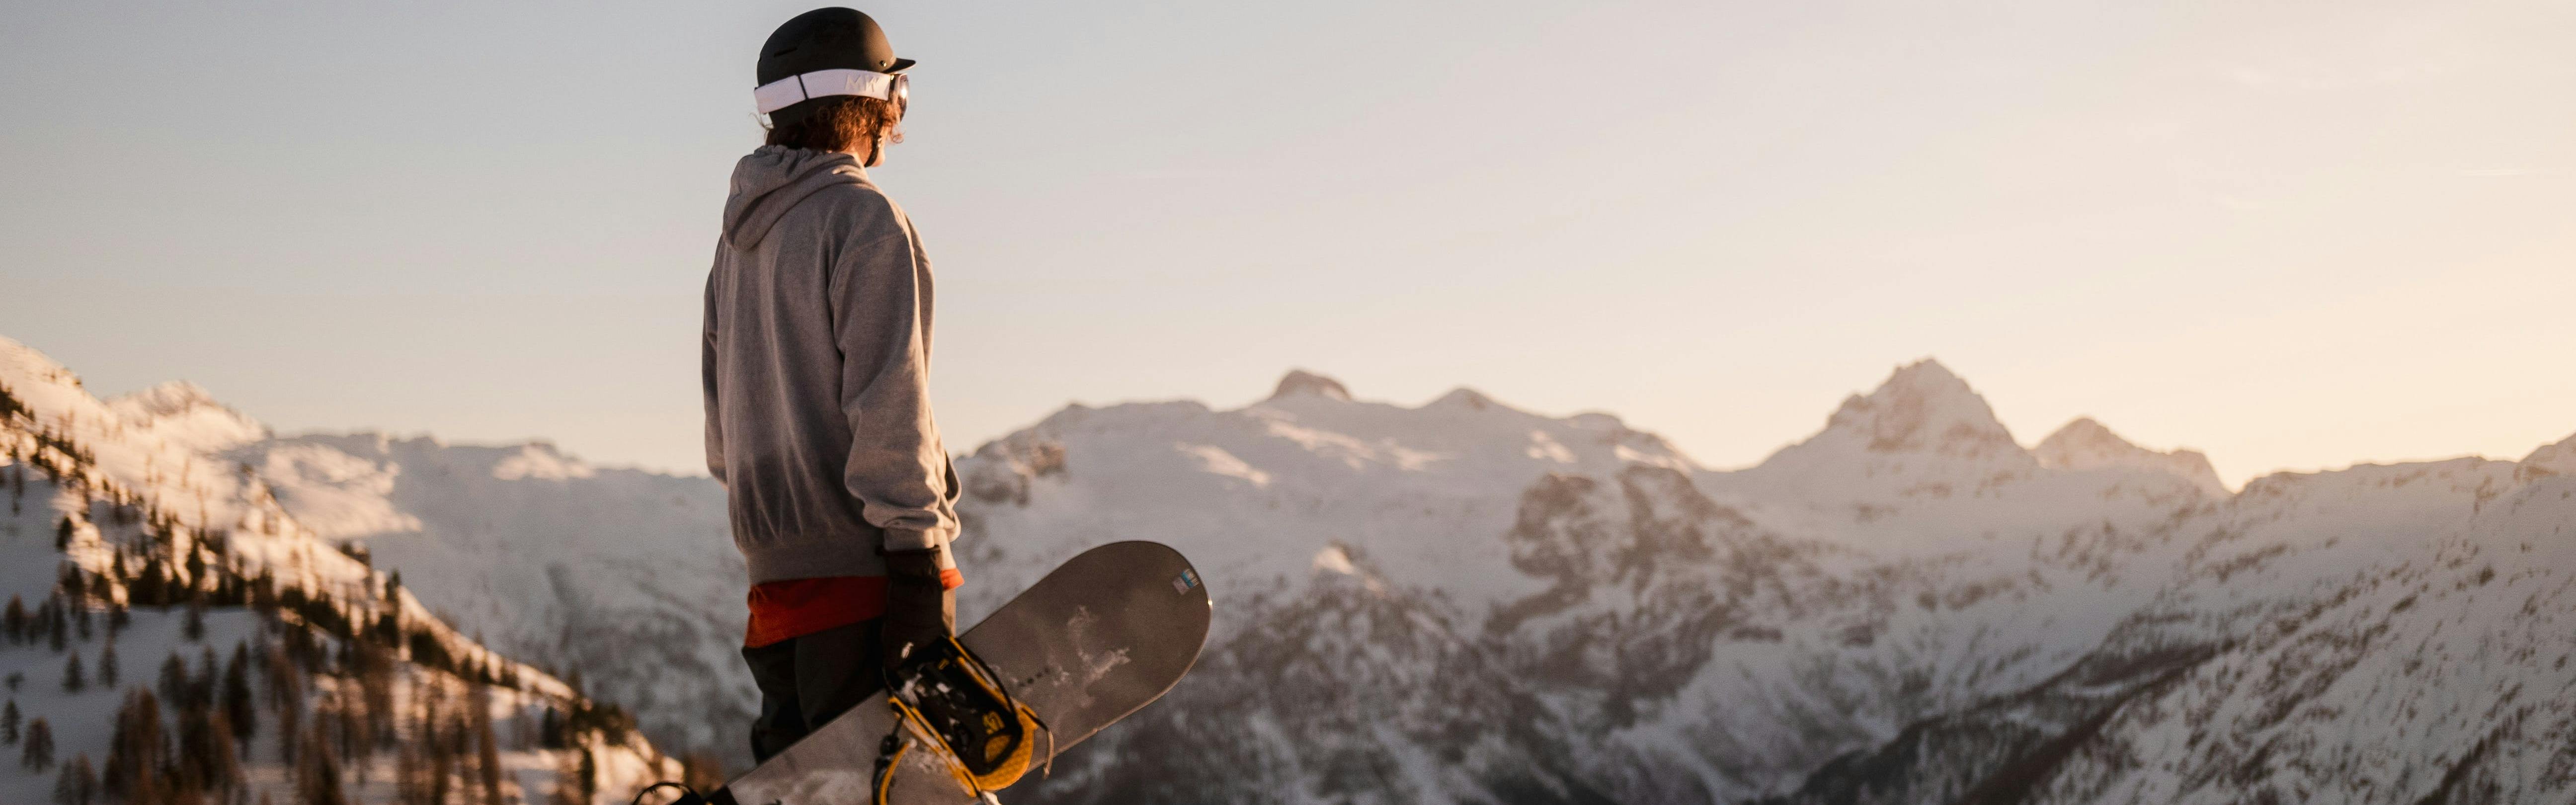 Snowboard Hoodies: How to Choose the Right One for You